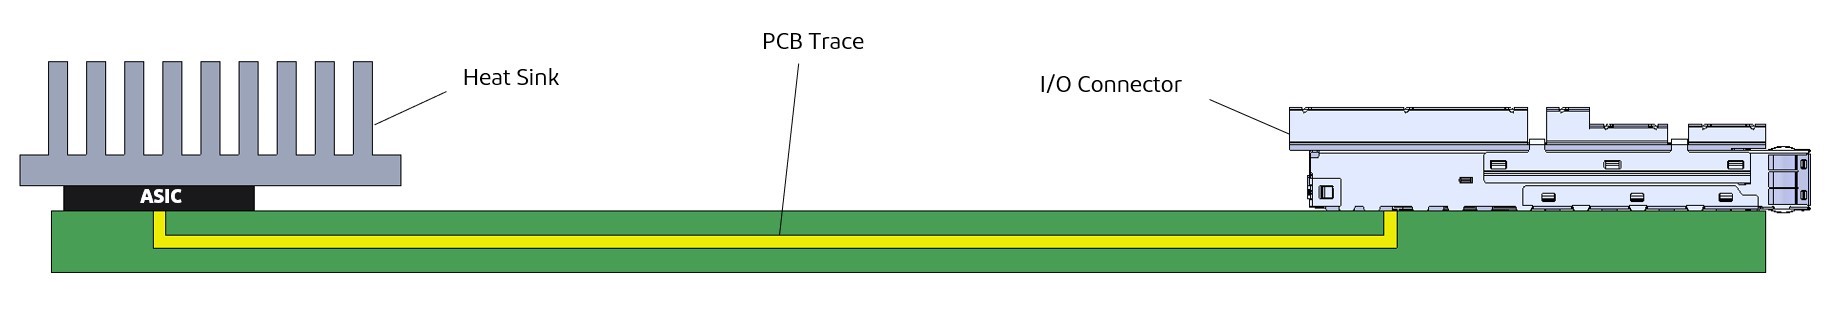 Existing PCB trace transmission from ASIC to IO.jpg